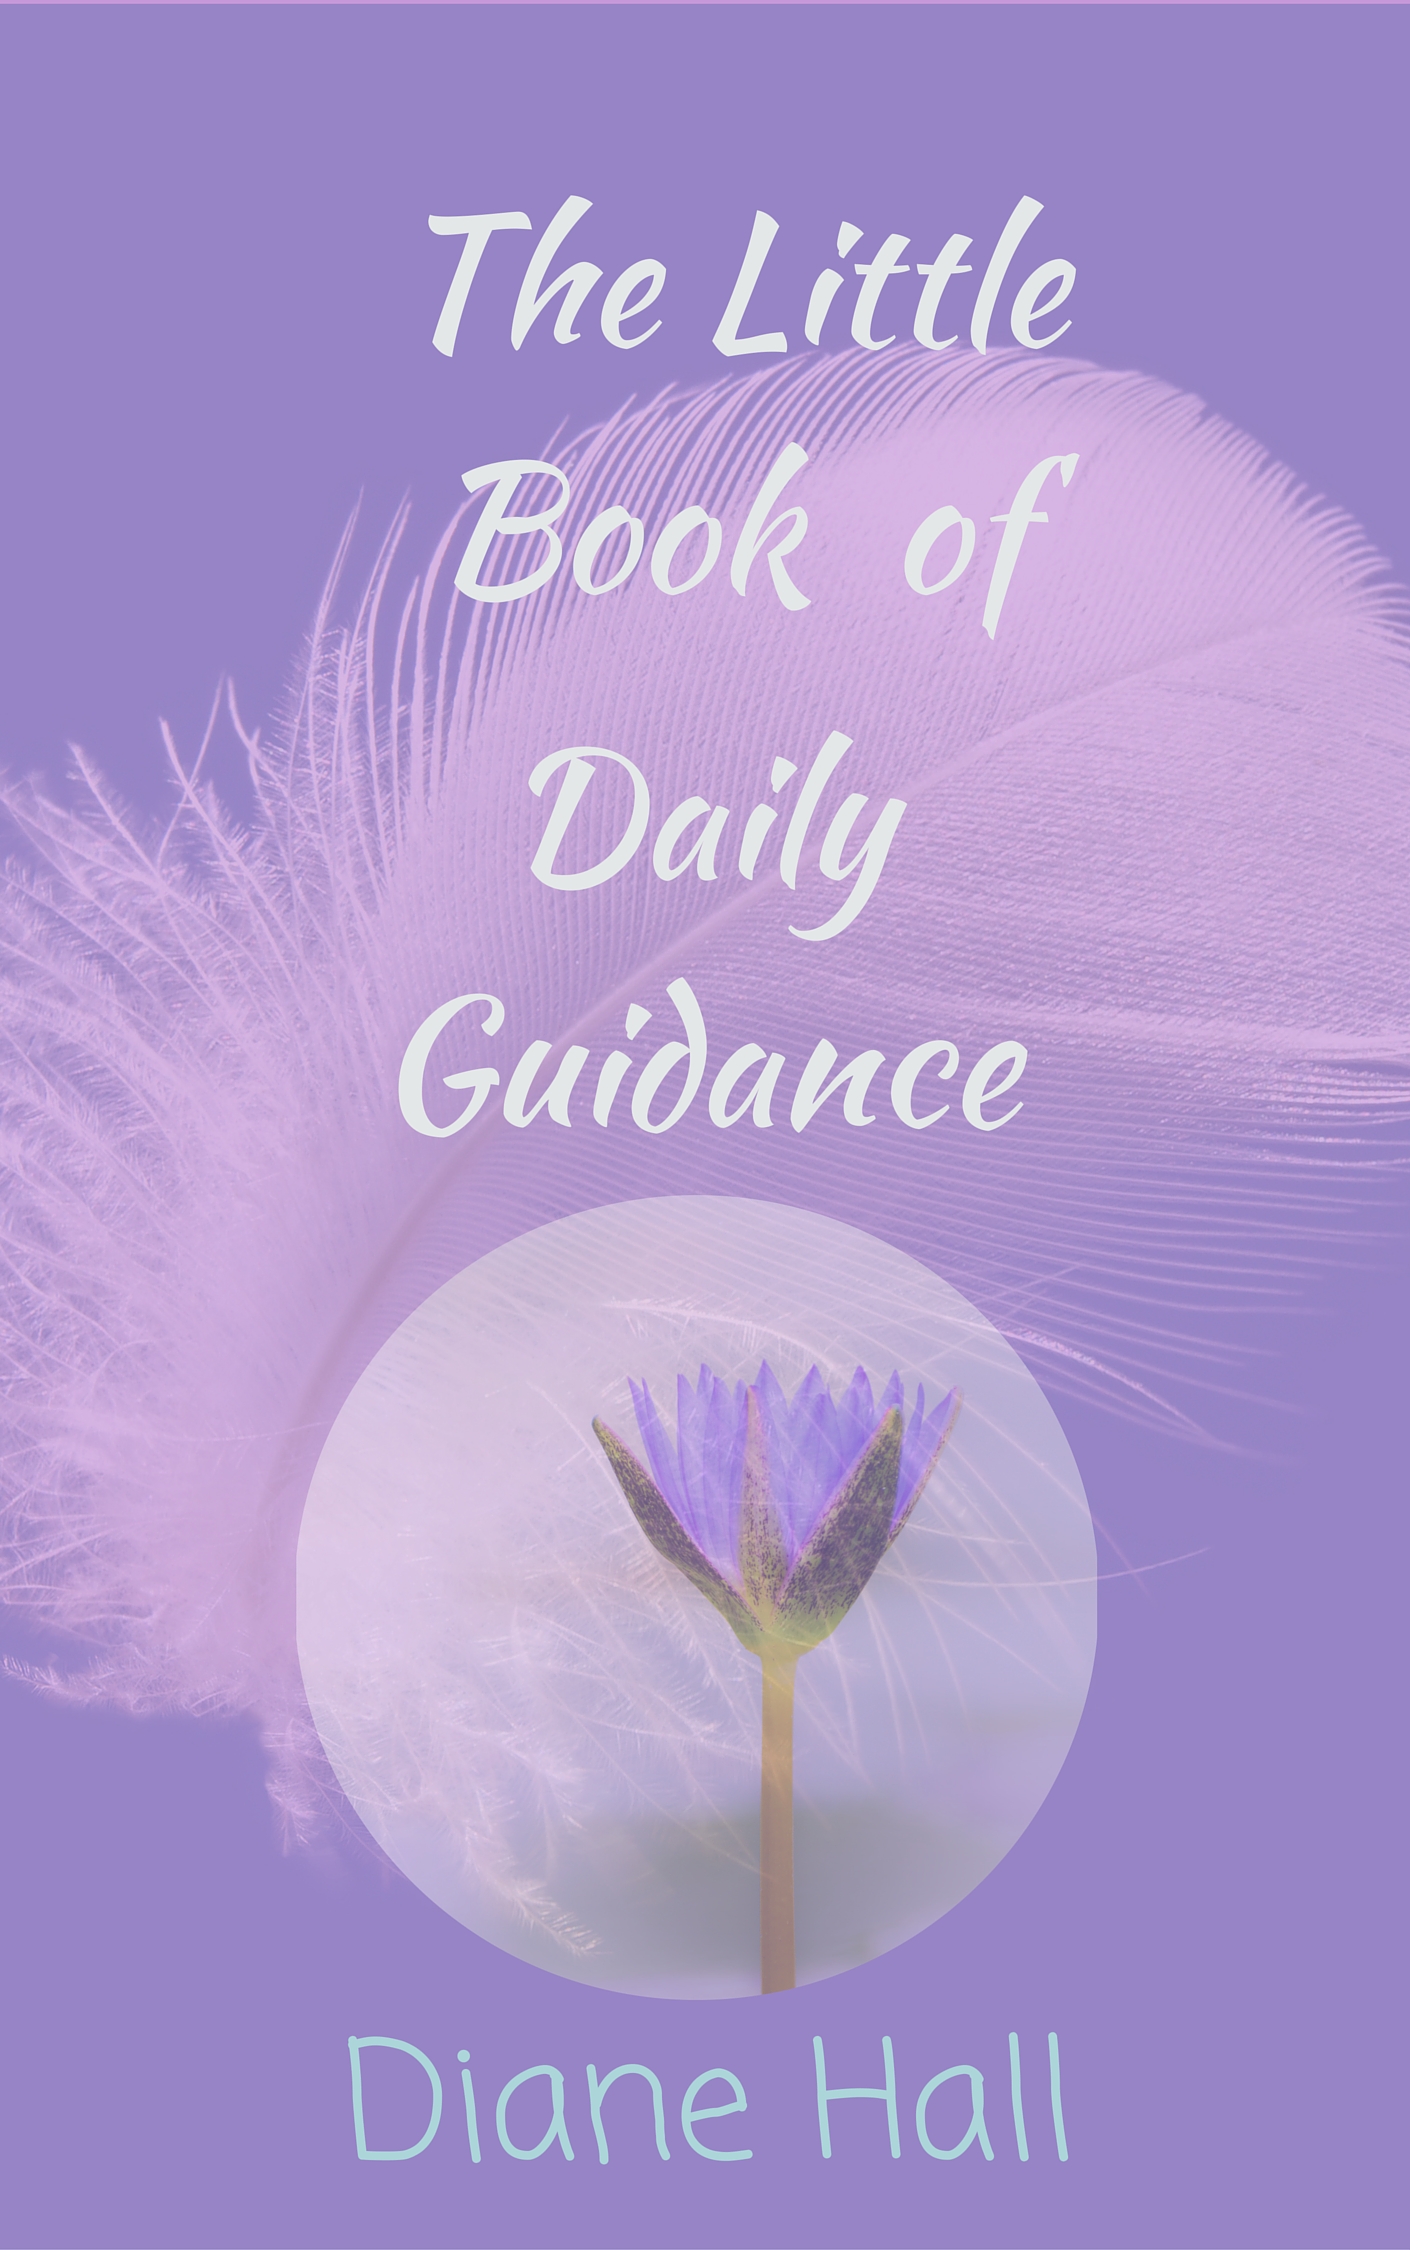 The Little Book of Daily Guidance